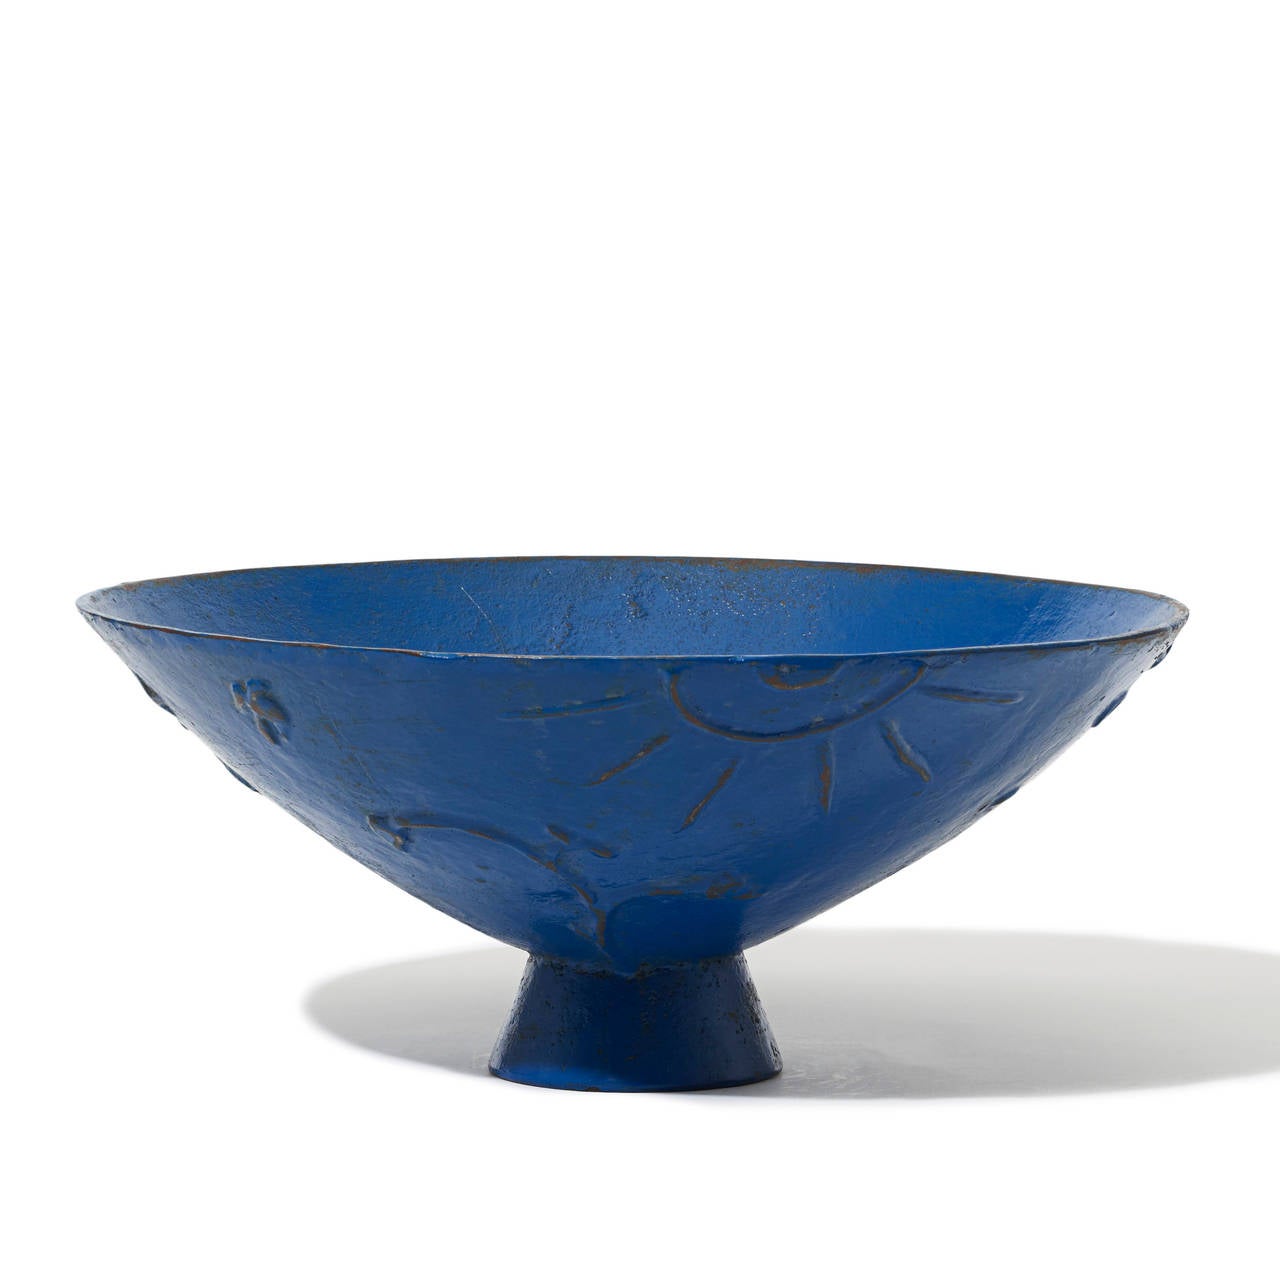 “Mikrokosmos” (“Microcosm”) urn designed by Olof Hult (1892-1962) for Nafveqvarns Bruk, in cast iron with original ultramarine blue paint, Sweden, designed 1922, executed 1923-early 1930s. A microcosm, the relief depictions include the Sun, Moon, a